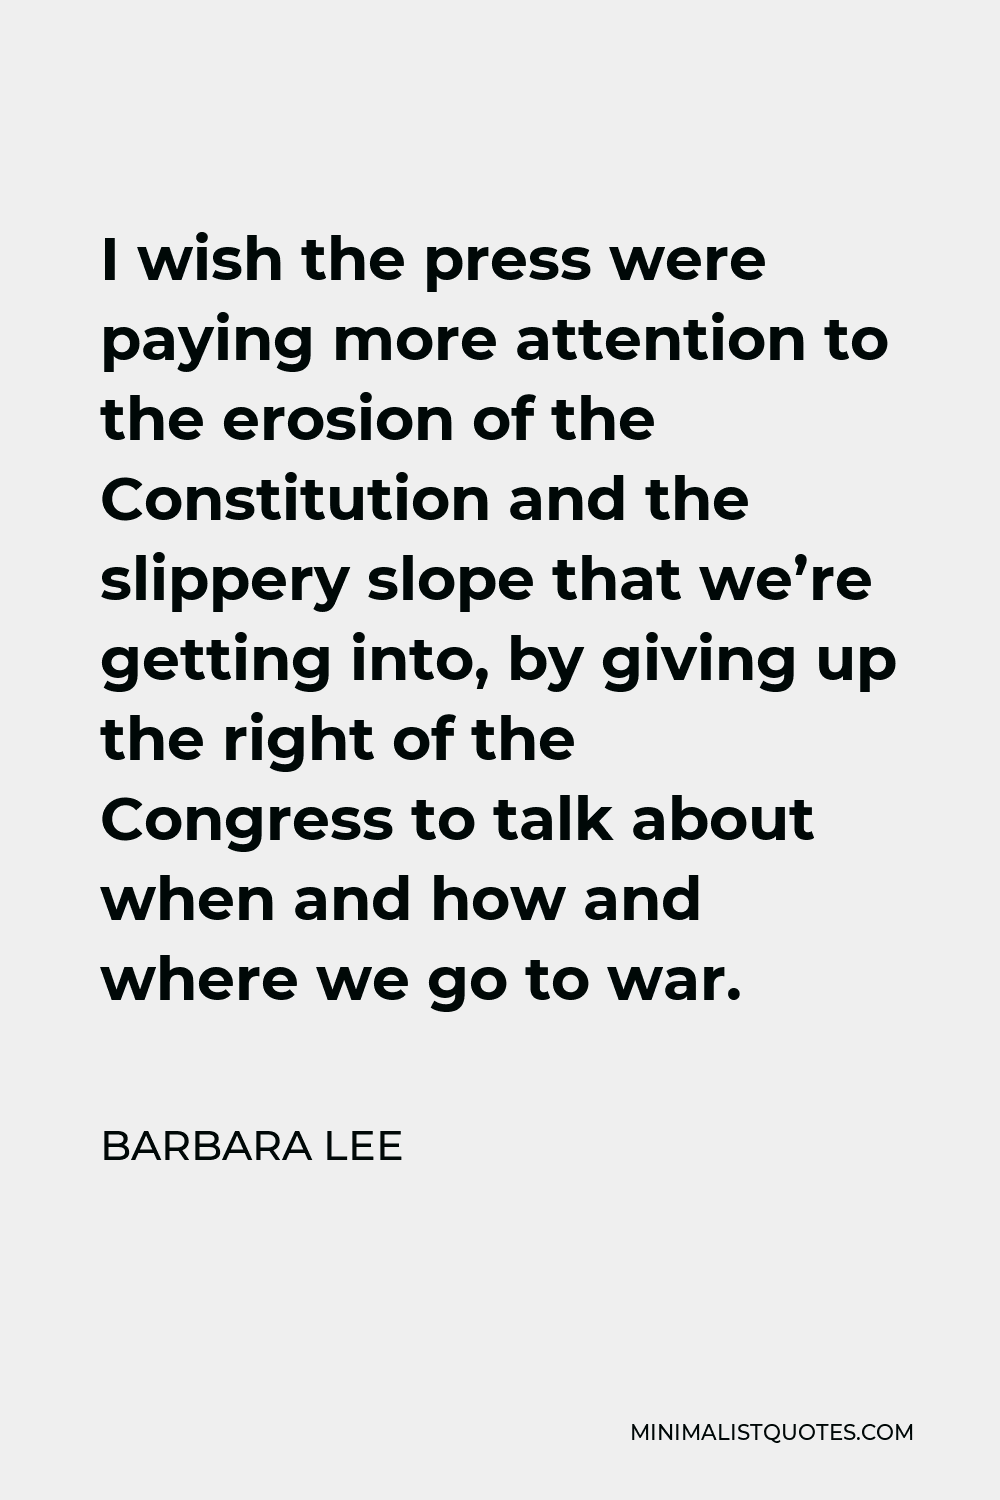 Barbara Lee Quote - I wish the press were paying more attention to the erosion of the Constitution and the slippery slope that we’re getting into, by giving up the right of the Congress to talk about when and how and where we go to war.